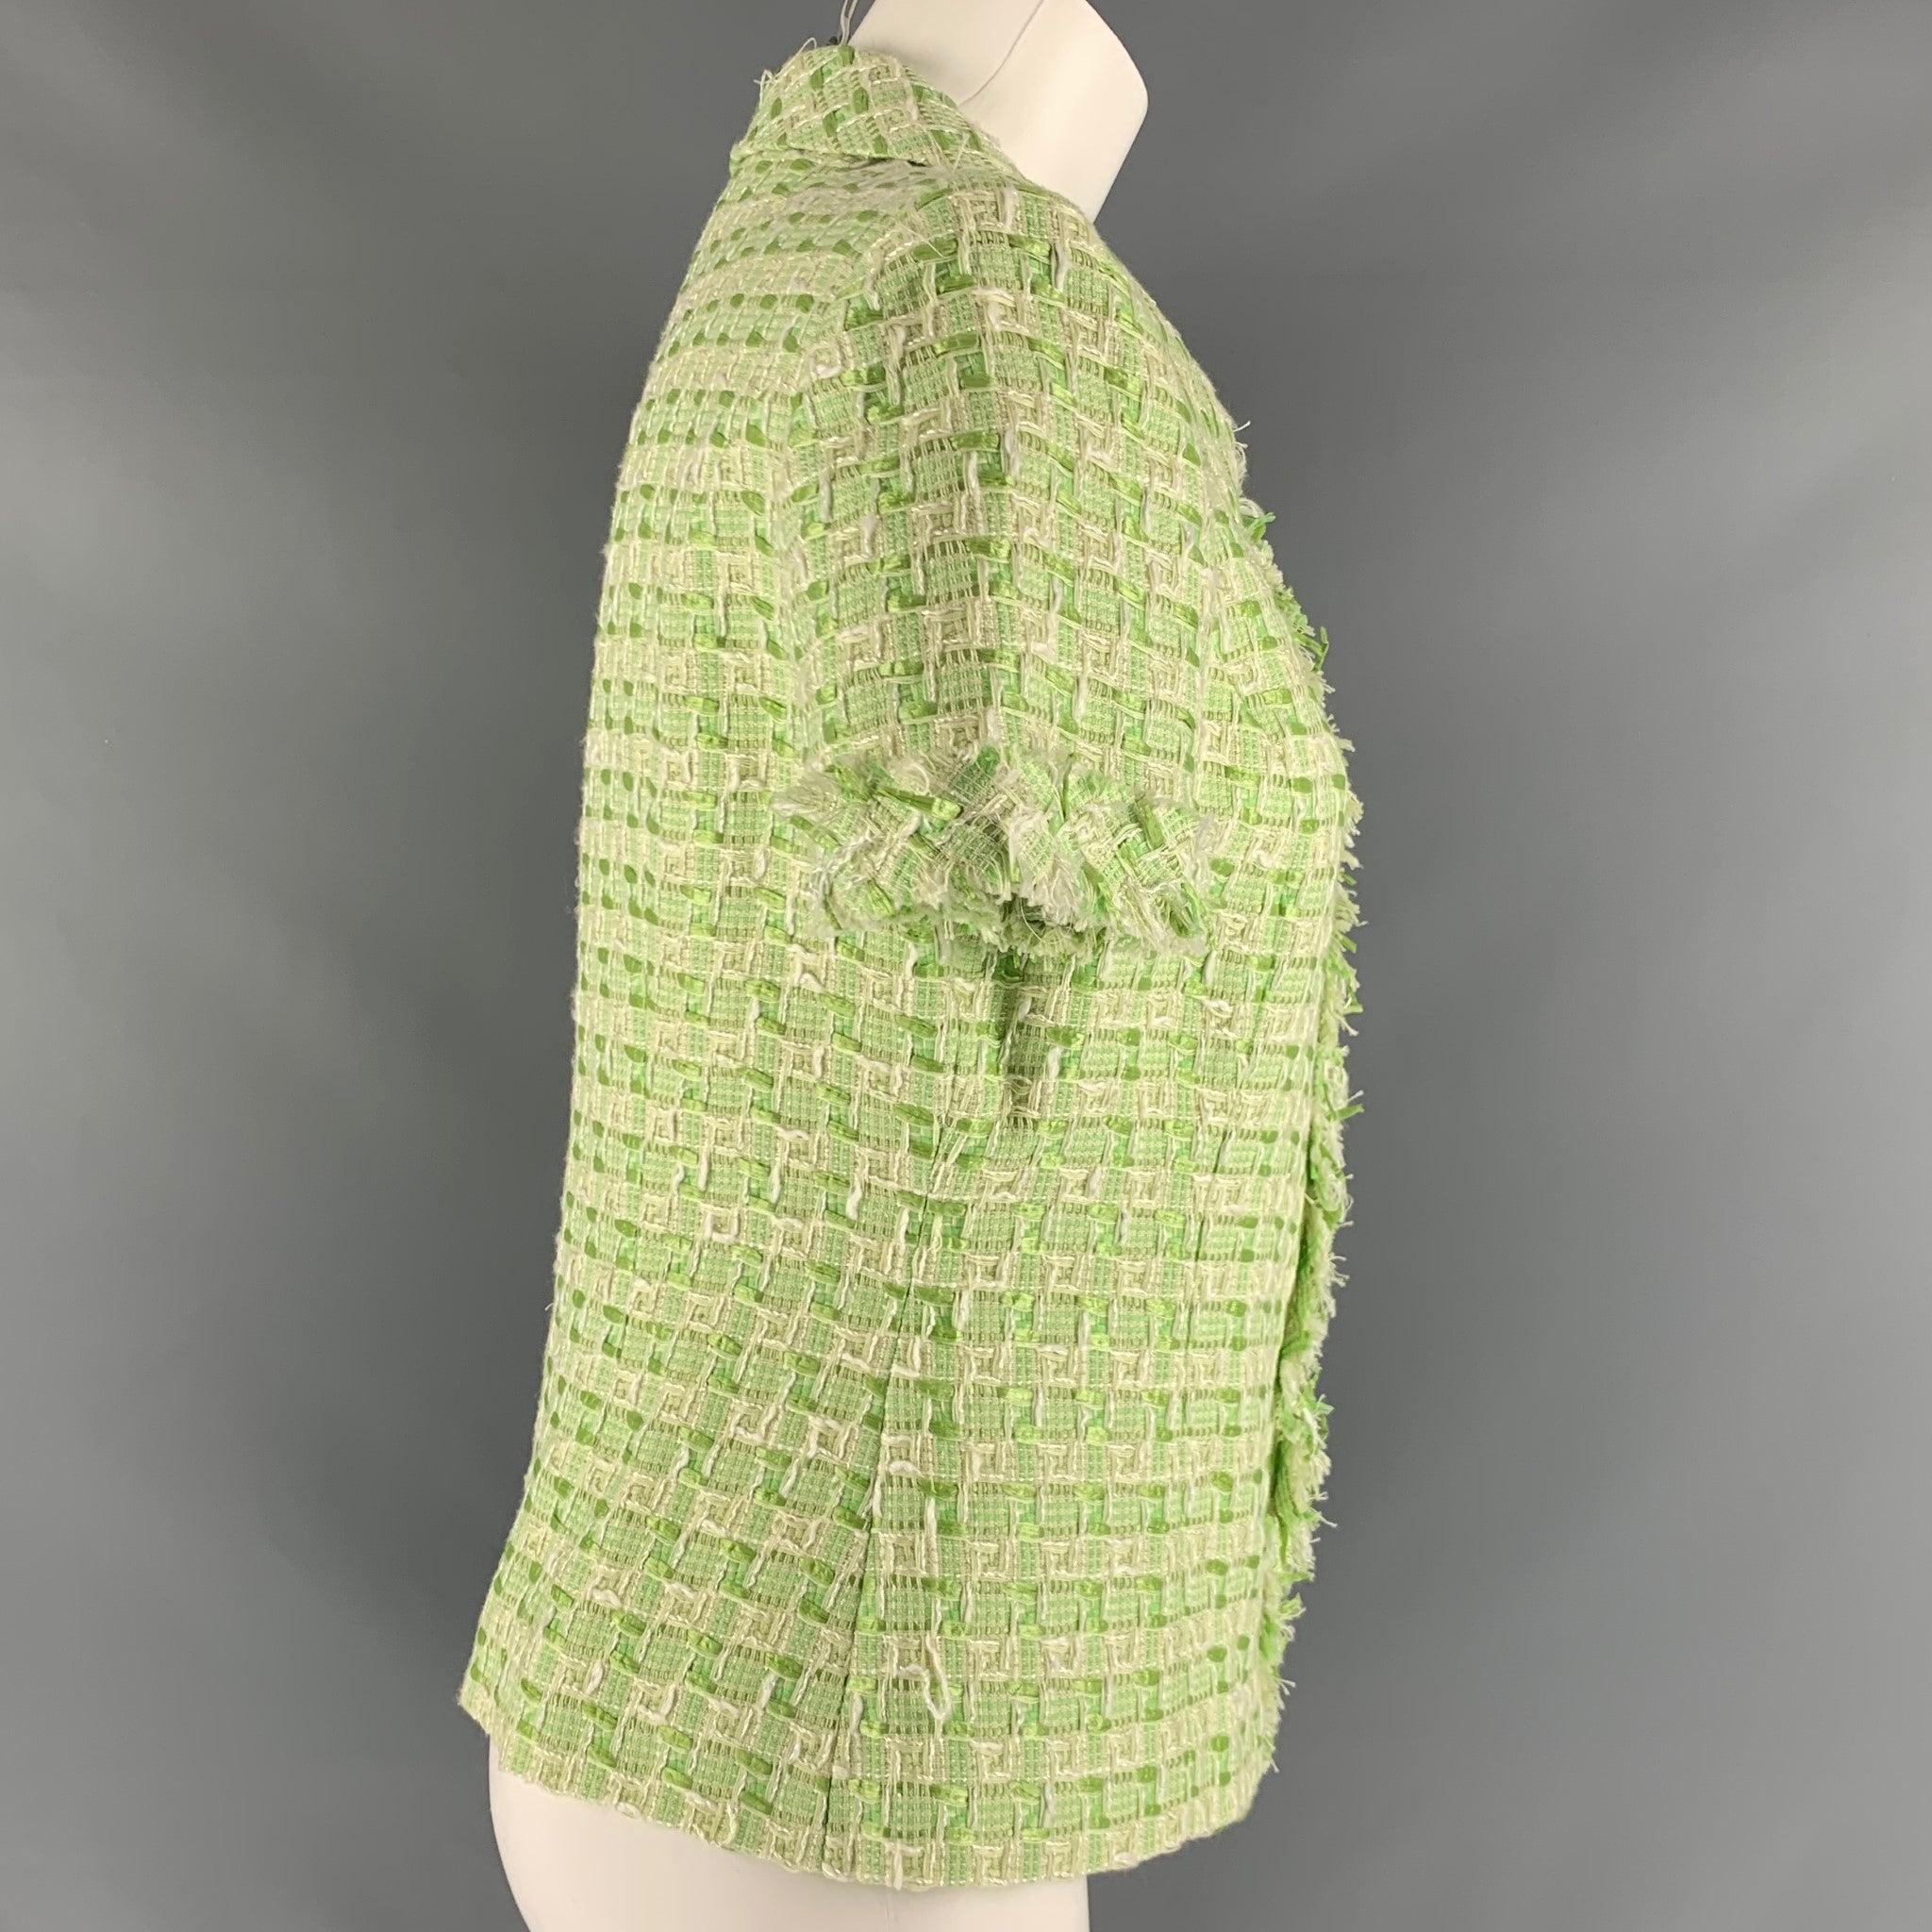 OSCAR DE LA RENTA dress top comes in green and white polyamide tweed woven material featuring short sleeves and a snap button closure. Made in Italy.Excellent Pre-Owned Condition. 

Marked:  8 

Measurements: 
 
Shoulder: 15 inBust: 37 inLength: 8.5